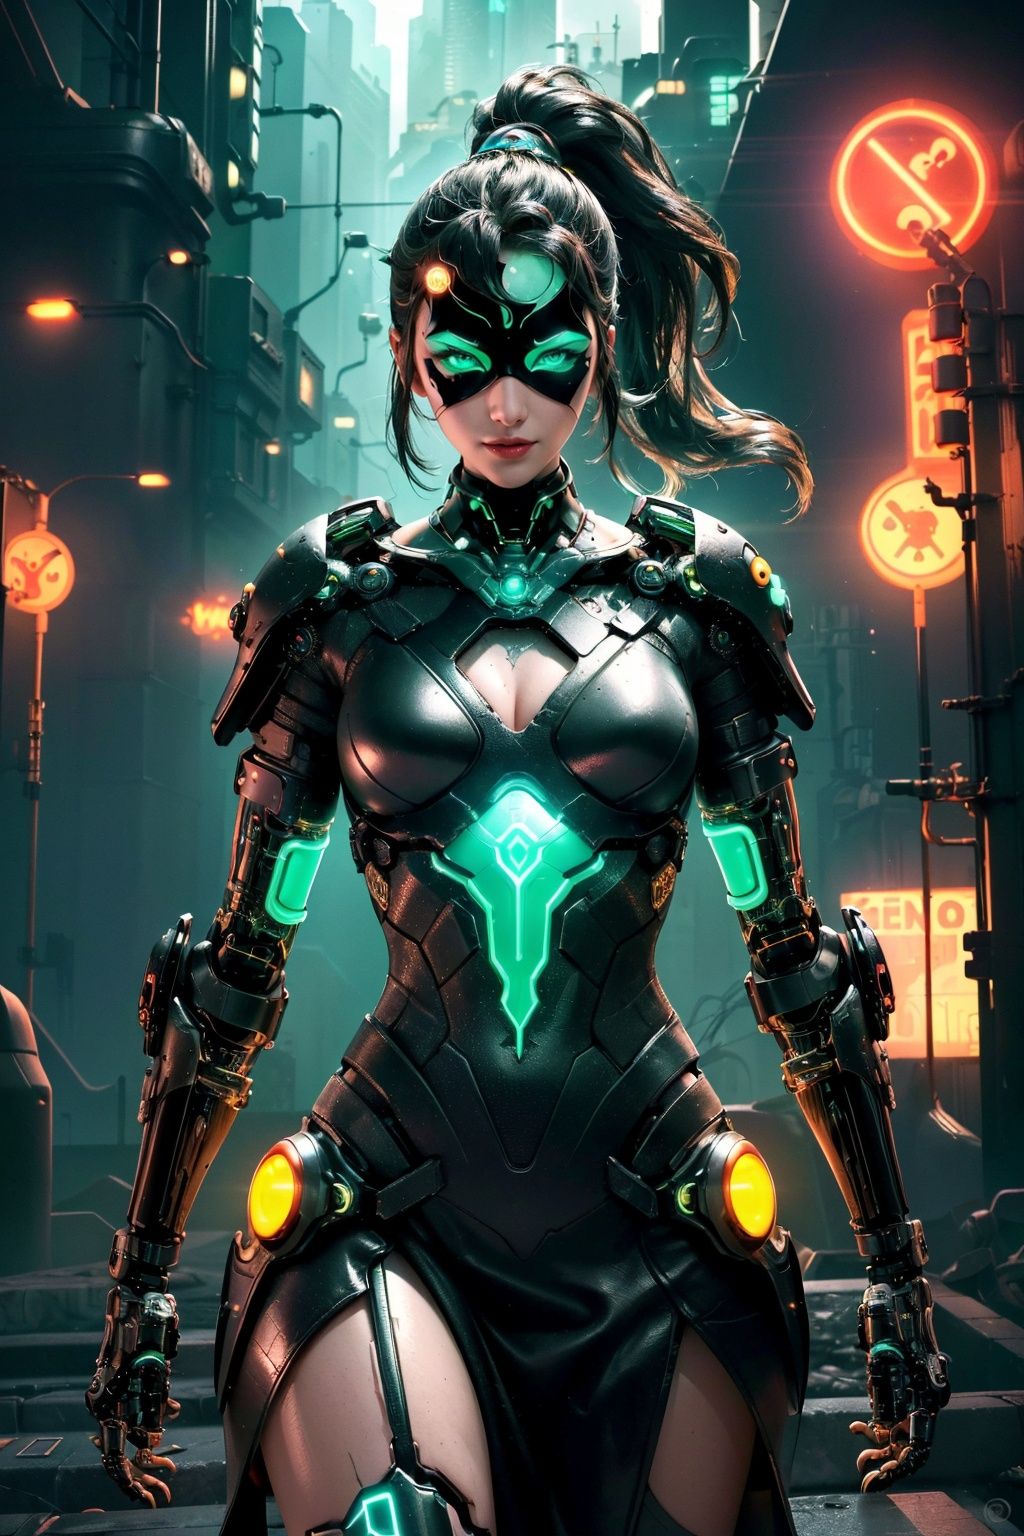  (Futuristic Sci-Fi Warrior:1.2), (Intergalactic Temptress:0.95), (Professional Cyberpunk Artistry:1.2),
(A futuristic warrior in black leather armor, her armored dress adorned with glowing patterns, high ponytail, and a seductive smile, with cyberpunk lighting and intricate facial tattoos, her purple skin and green eyes stand out in a futuristic cityscape with green abstract background and streaming sunlight, (Cybernetic Enchantment:1.15), Futuristic seduction, (Sci-Fi Neon Beauty:1.2), (Digital Elegance and Temptation:1.2)
(Close-up of cybernetic patterns:1.1), (Neon City Temptation:1.1), (Futuristic Utopia:1.1), Drawn into the cybernetic world, (Neon Glows and Futuristic Allure),
Futuristic seduction, (Sci-Fi Neon Beauty:1.2), (Cyberpunk Temptation, Digital Dreams:1.2)
Futuristic warrior, intergalactic temptress, neon city temptation, digital elegance, cyberpunk temptation, cybernetic patterns, futuristic utopia, futuristic allure, neon glows, cyberpunk lighting., Pumpkin mask